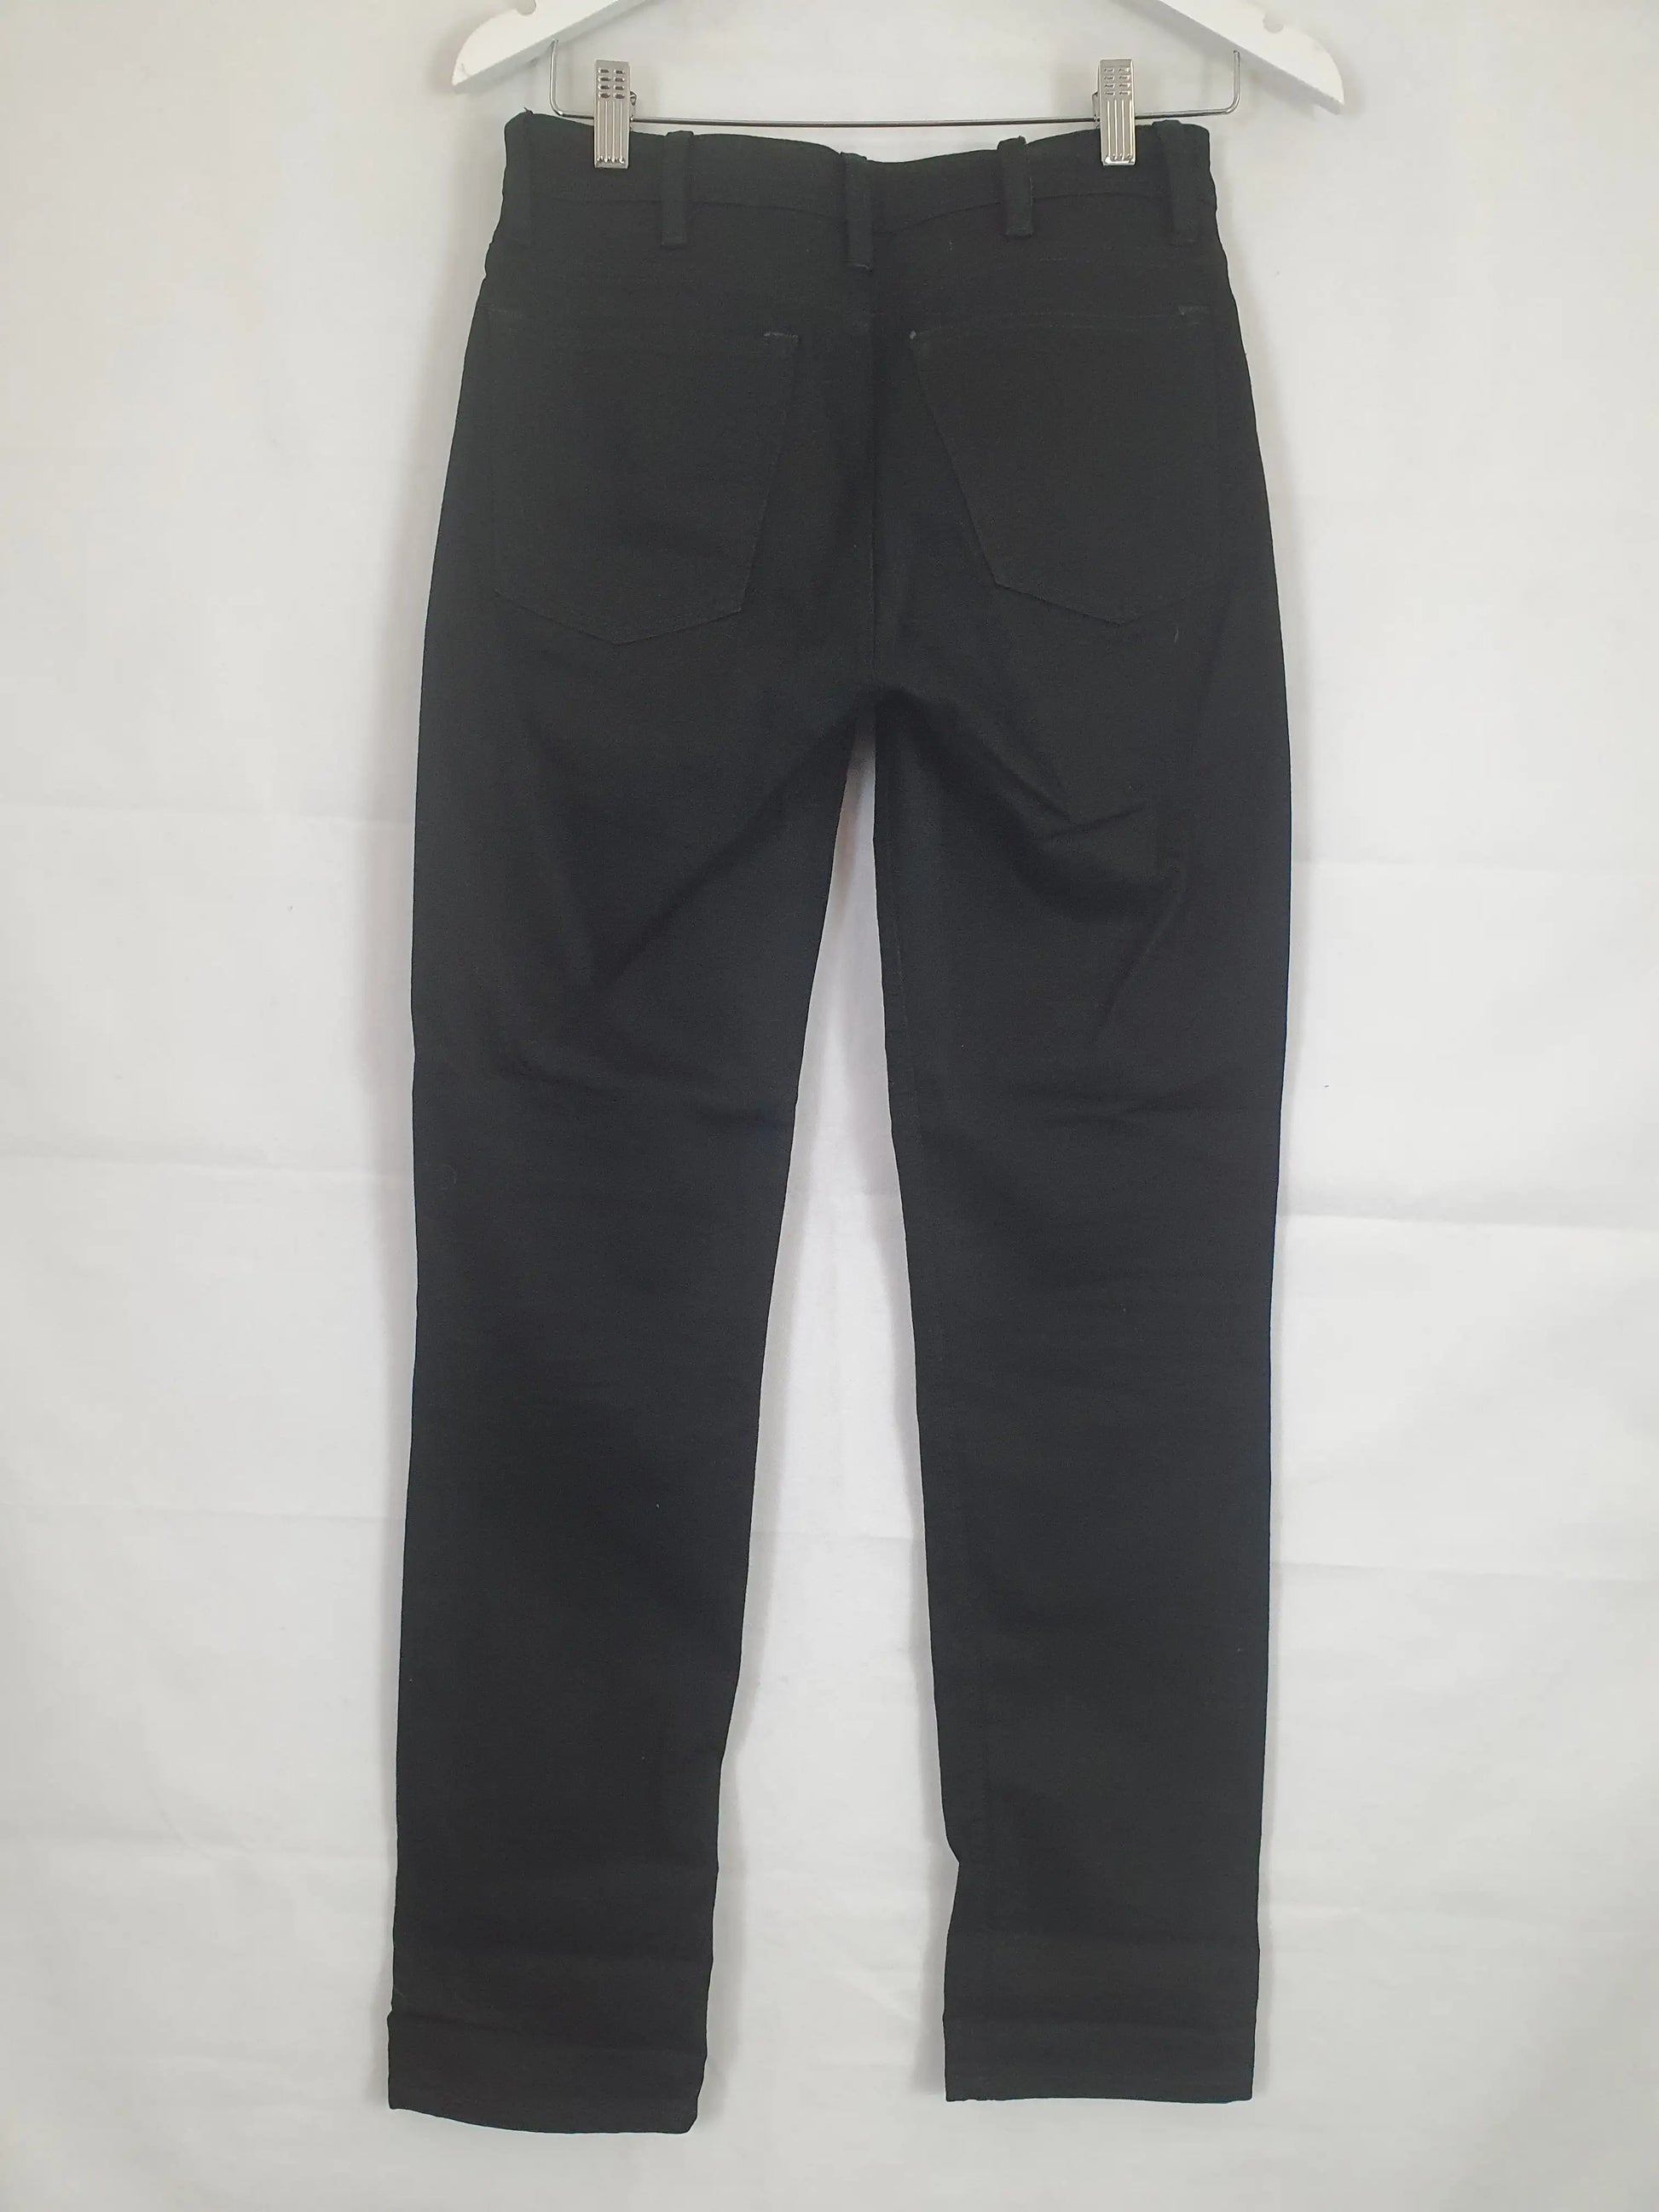 rytme Undertrykke At regere Acne Studios South Stay Black Jeans Size 8 – SwapUp